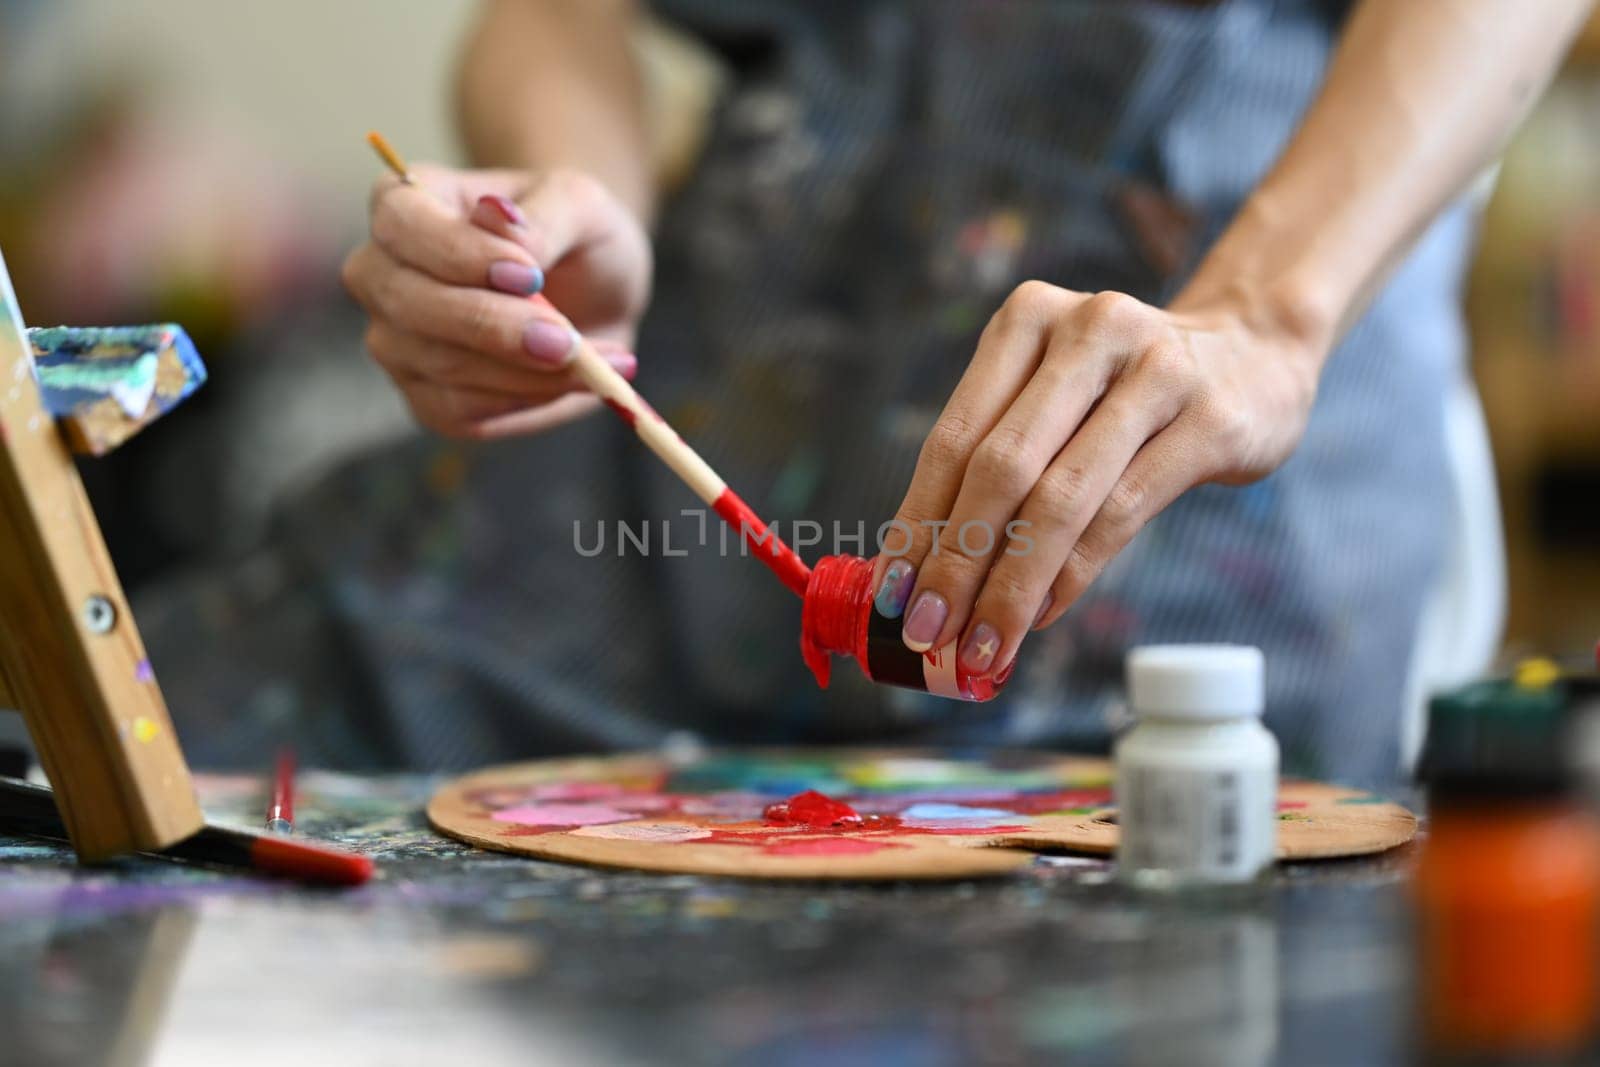 Closeup view of artist mixing color oil painting on palette. Art, hobby and leisure activity concept.